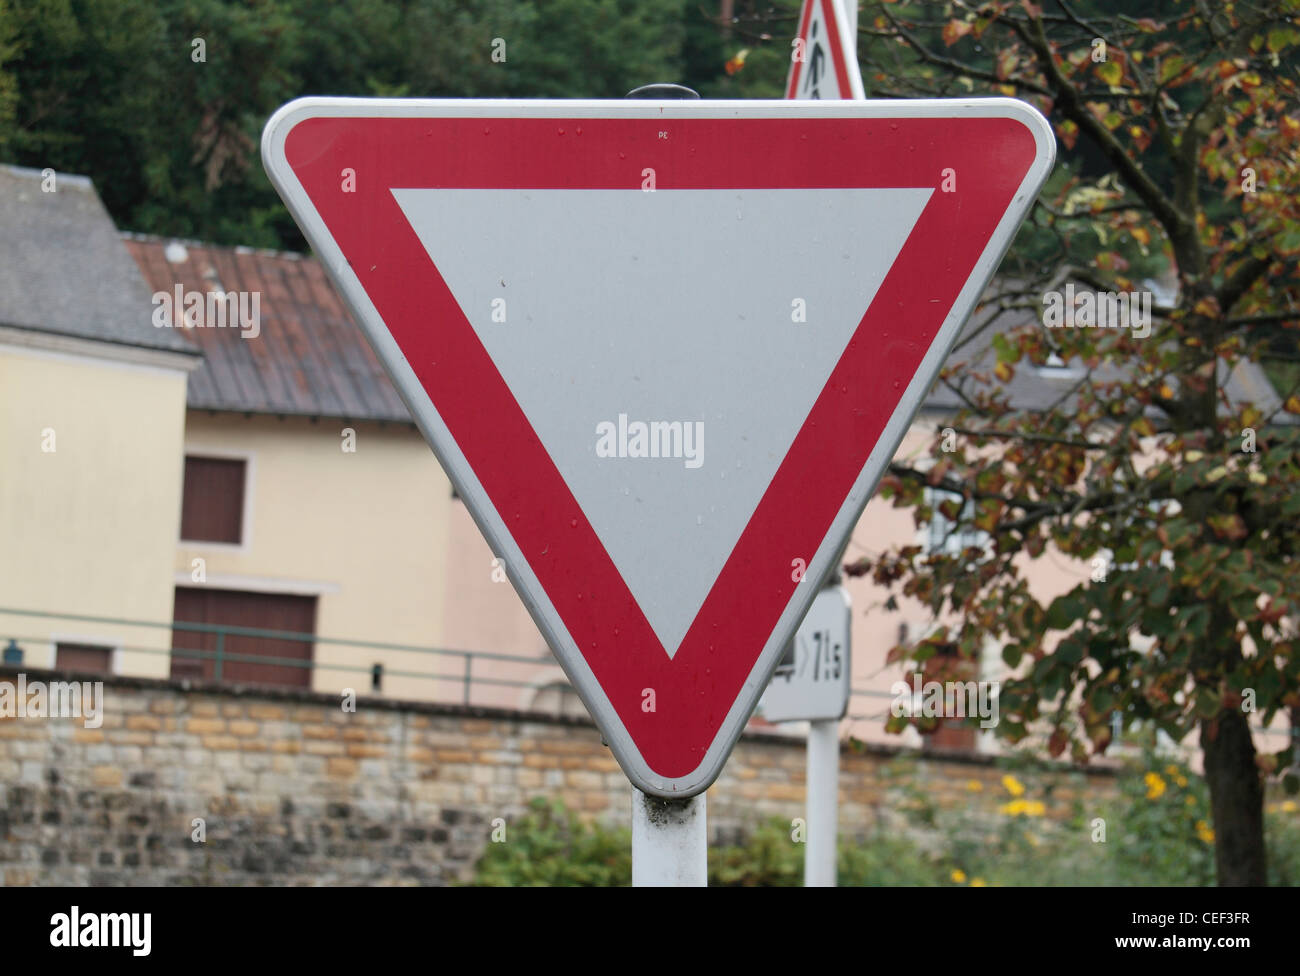 Yield Sign Blank High Resolution Stock Photography And Images Alamy